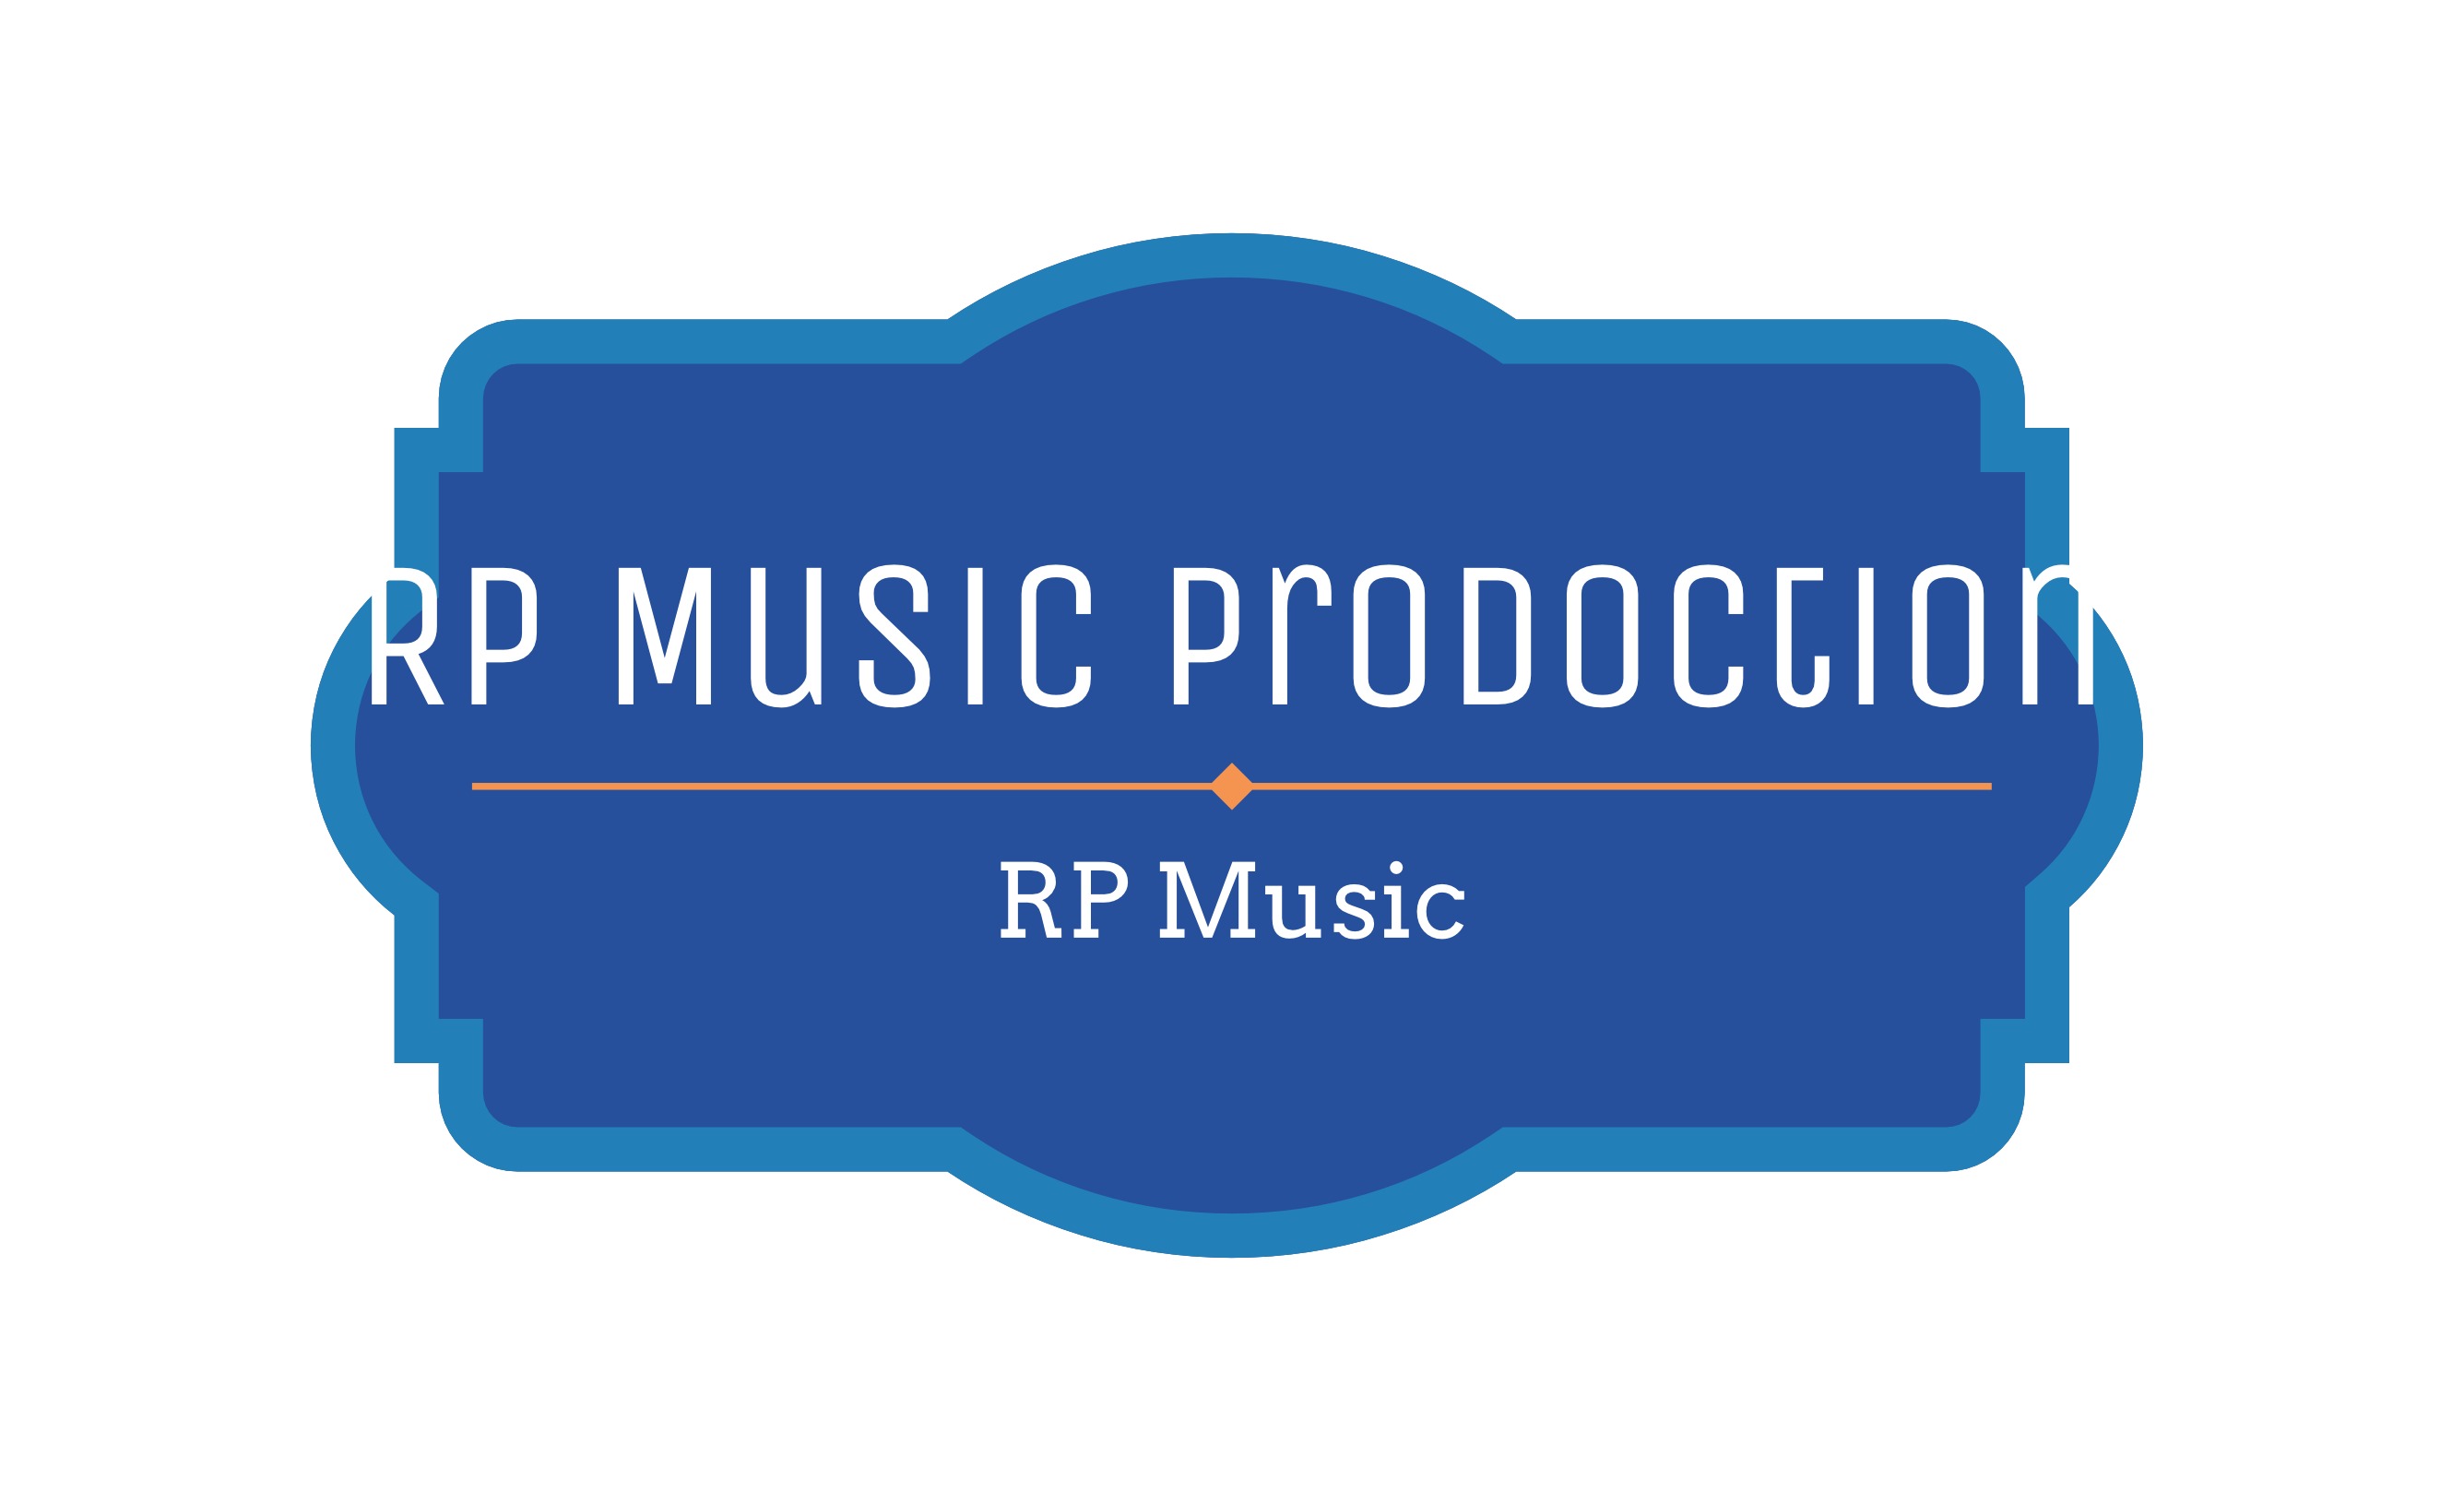 RP Music Production